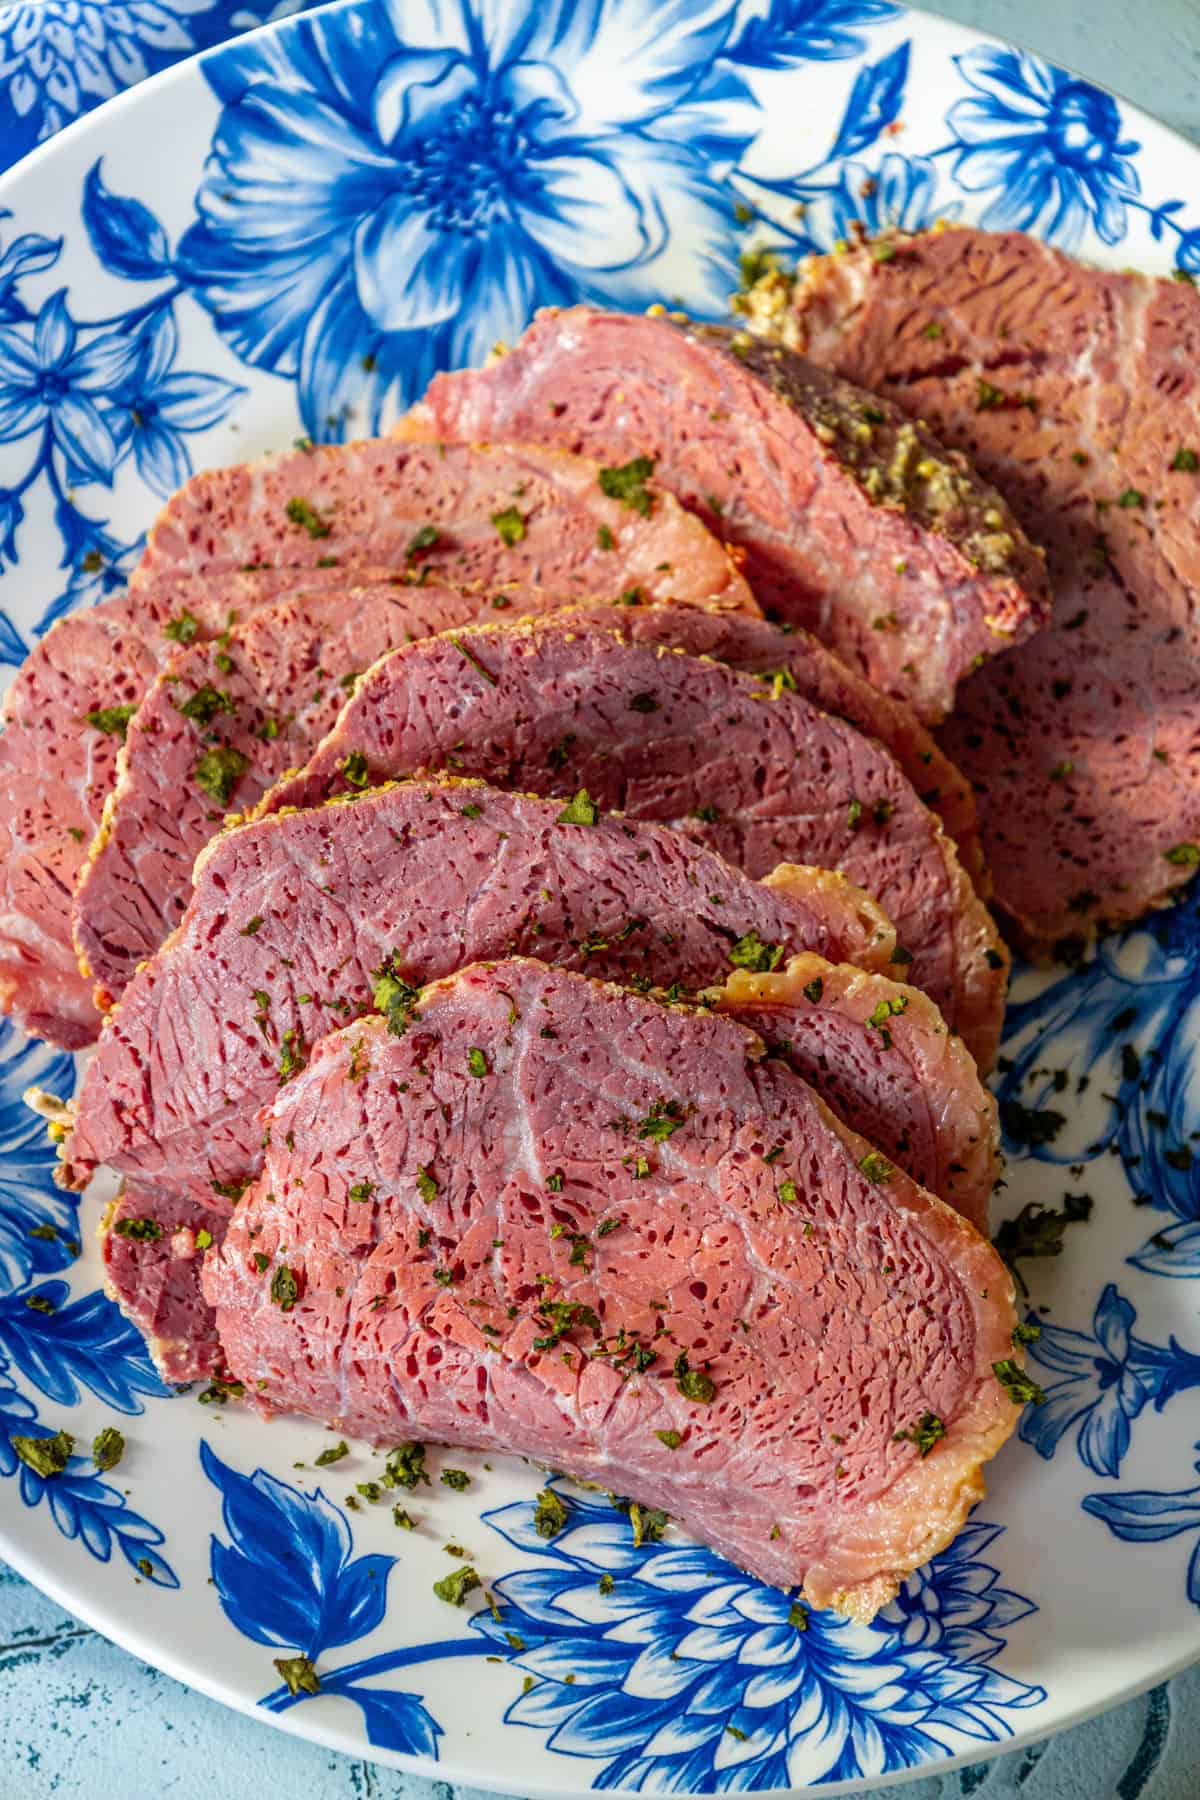 A plate of roasted corned beef on a blue and white floral pattern.